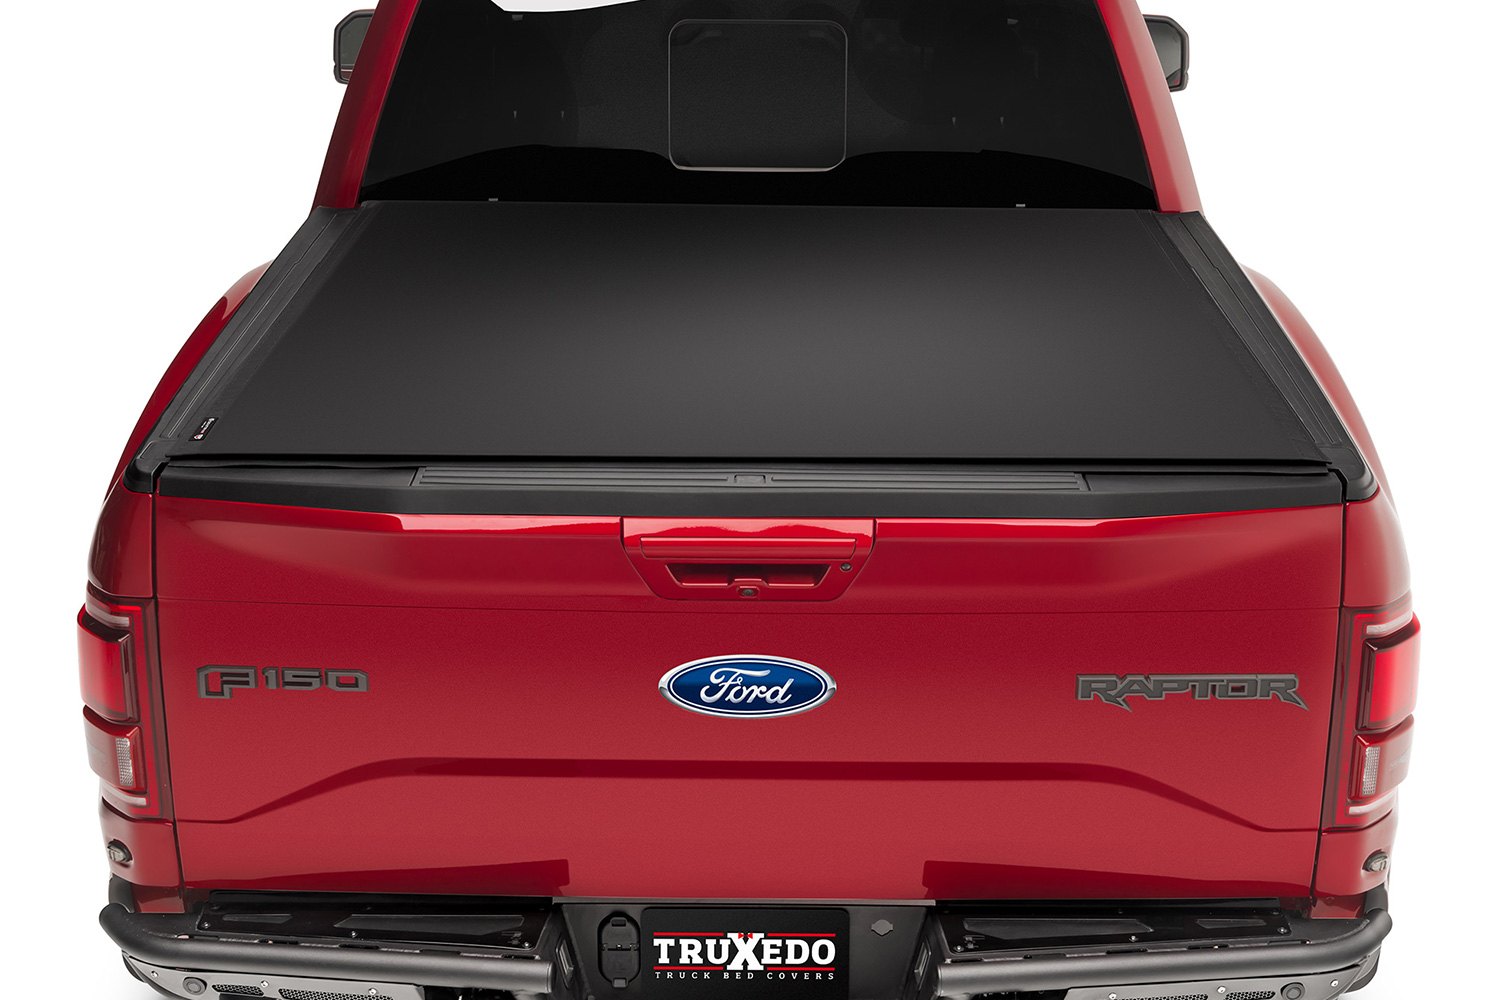 Truxedo Sentry CT Hard Roll Up Tonneau Cover For Toyota Tundra 2007-2021 1545716